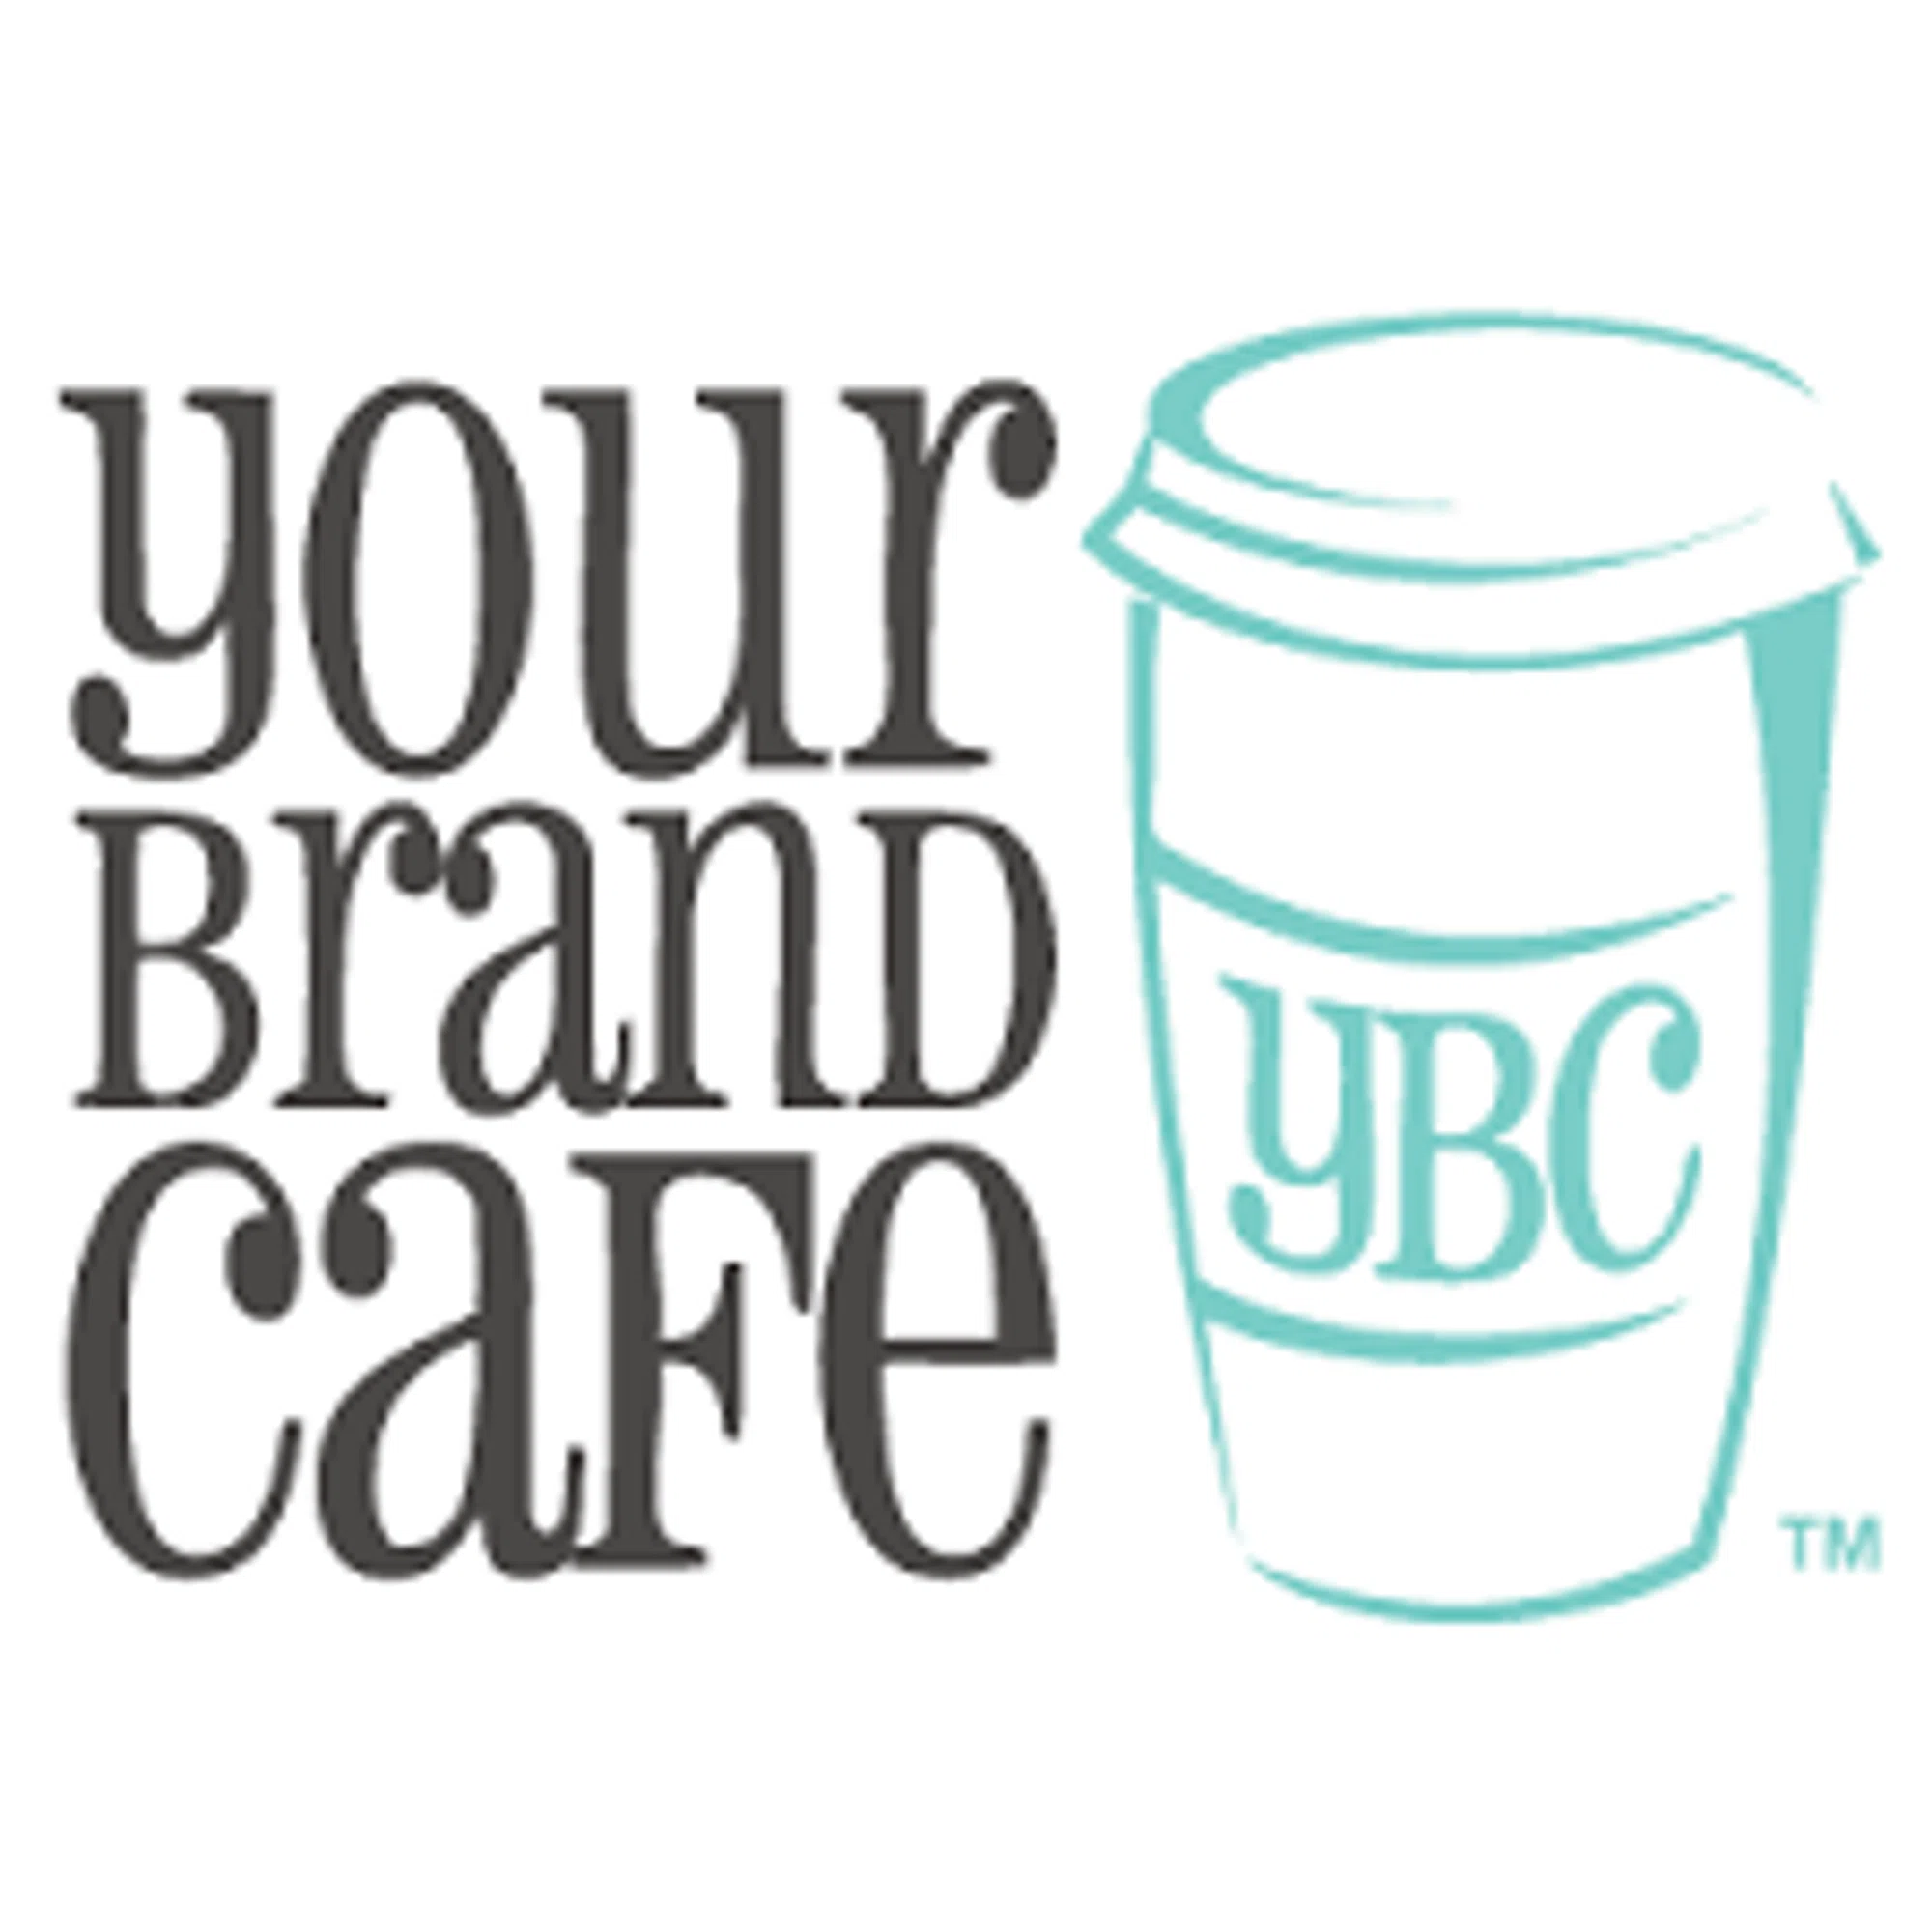 Your Brand Cafe